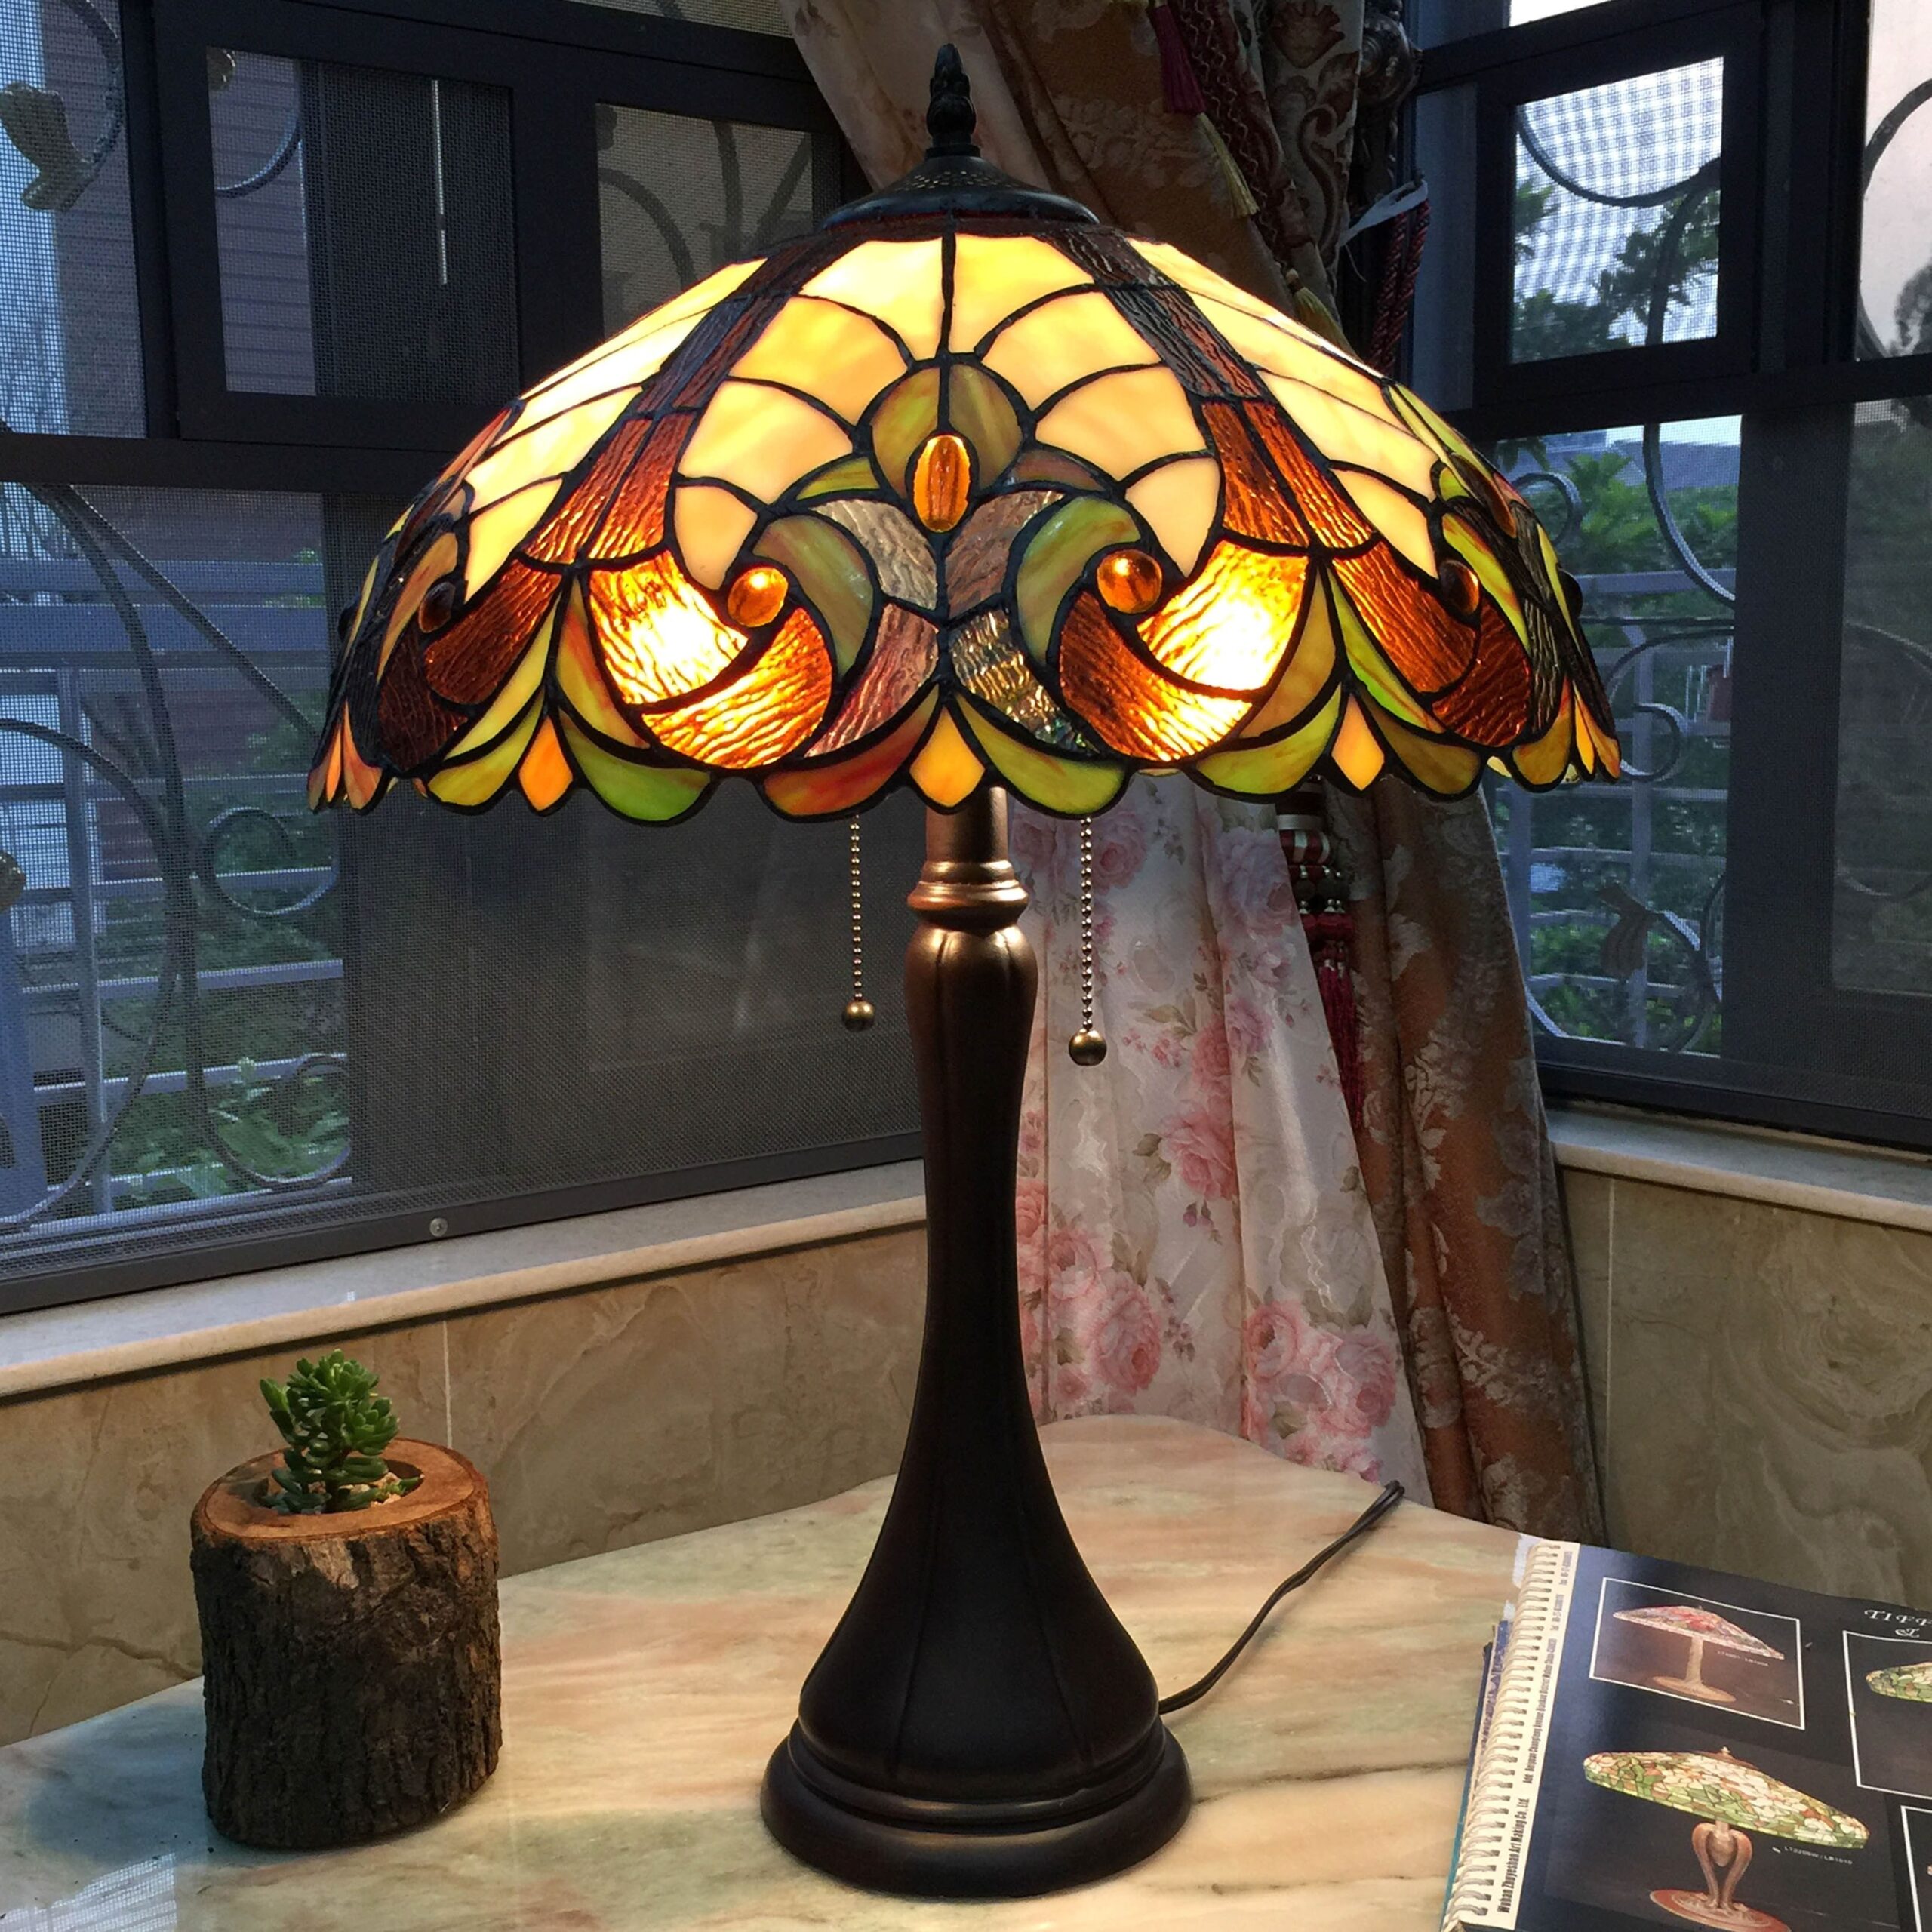 Uncovering the History Behind Antique
Lamp Designs